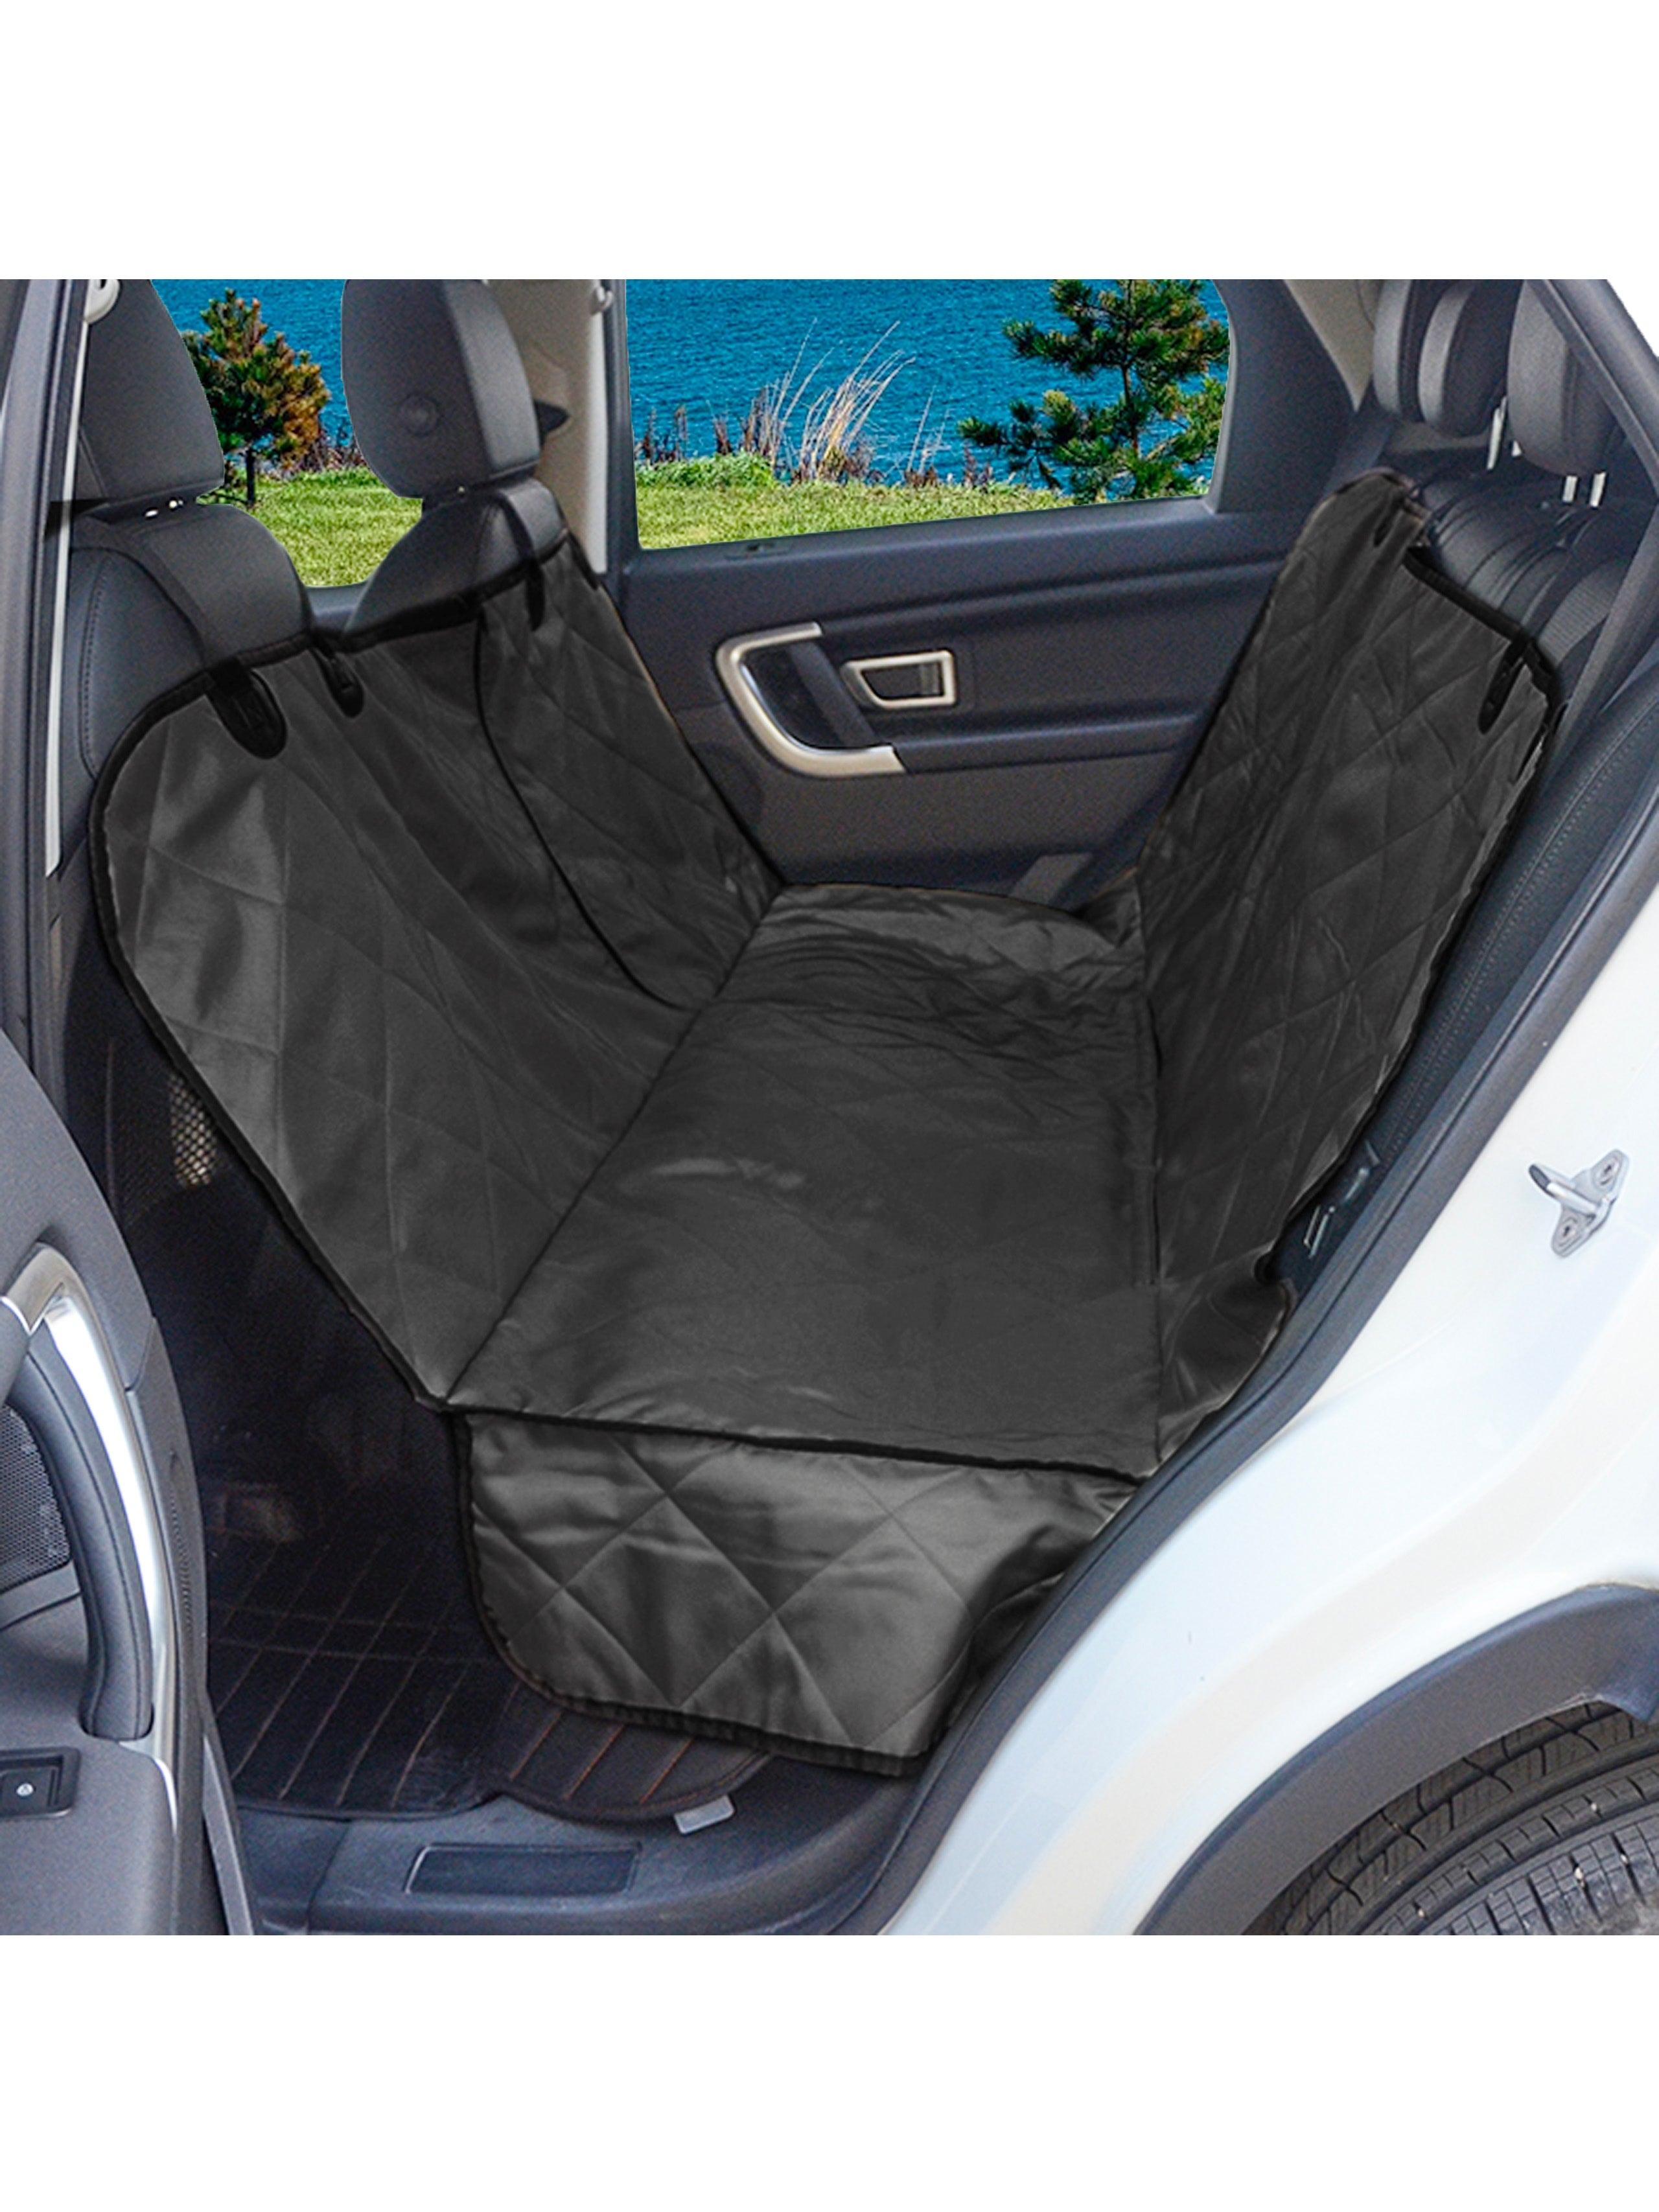 Bspoiled Pet Car Seat Cover – BSpoiled